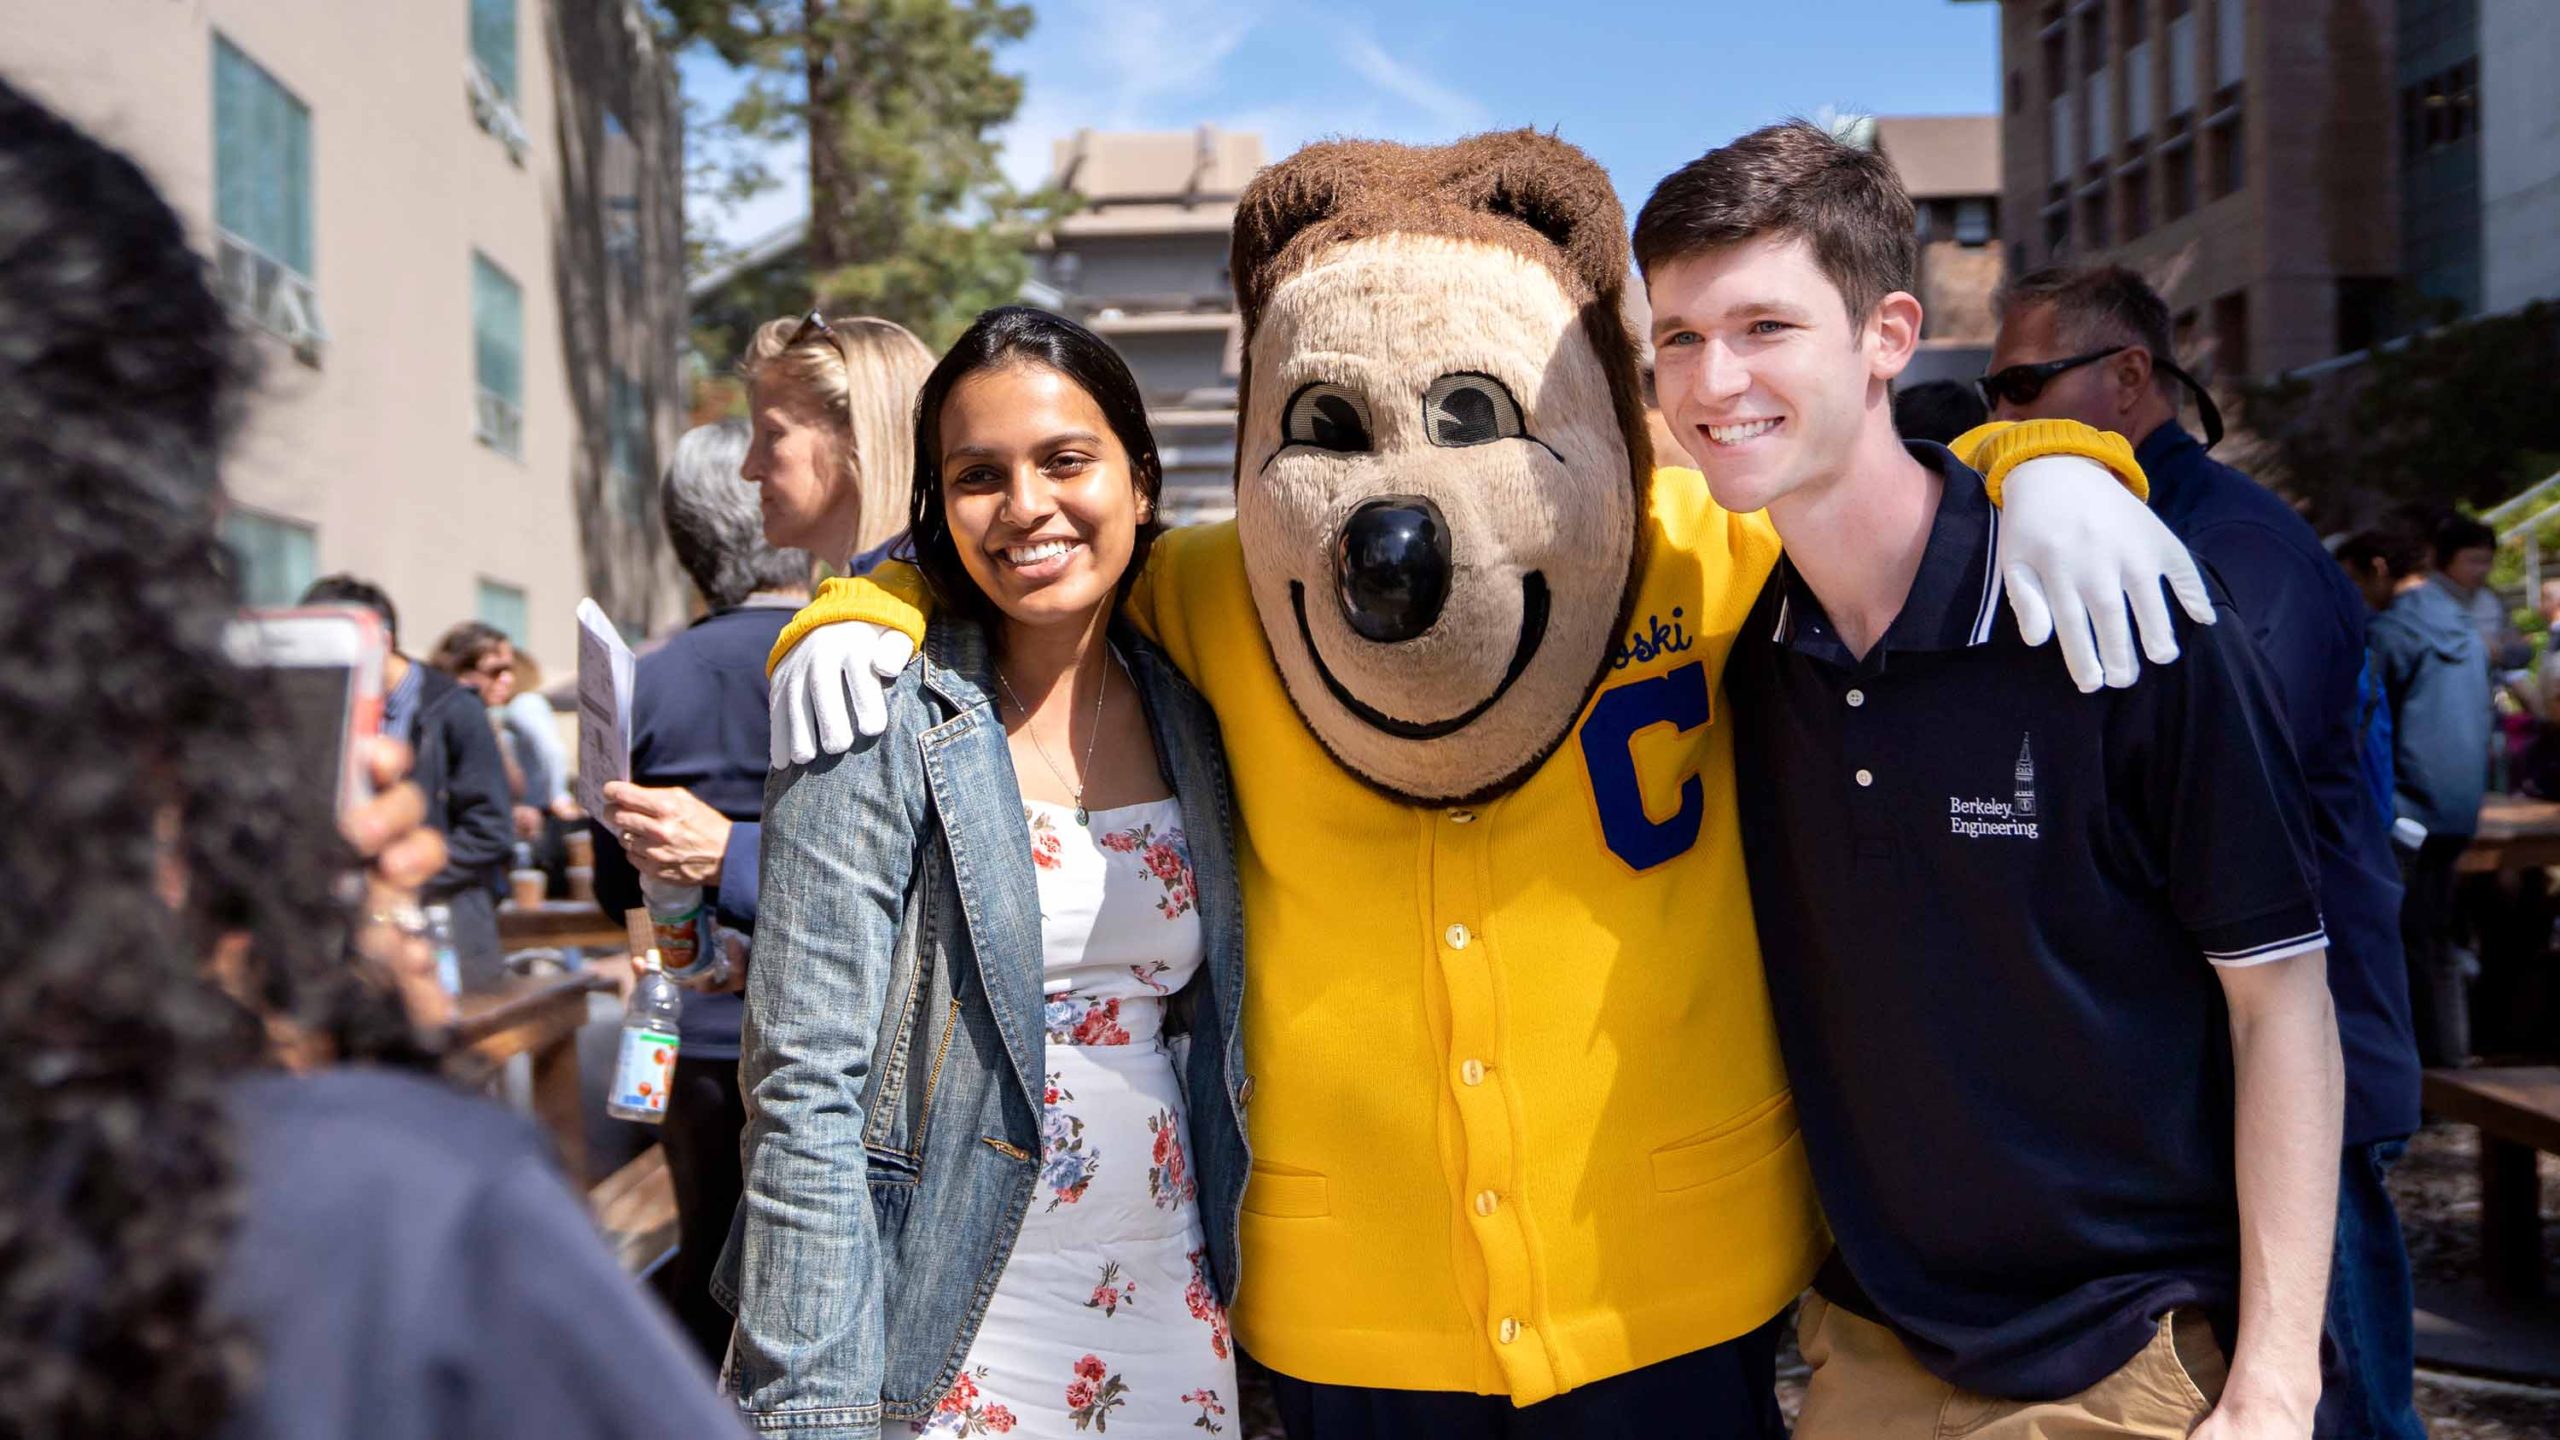 Oski posing for photos with students